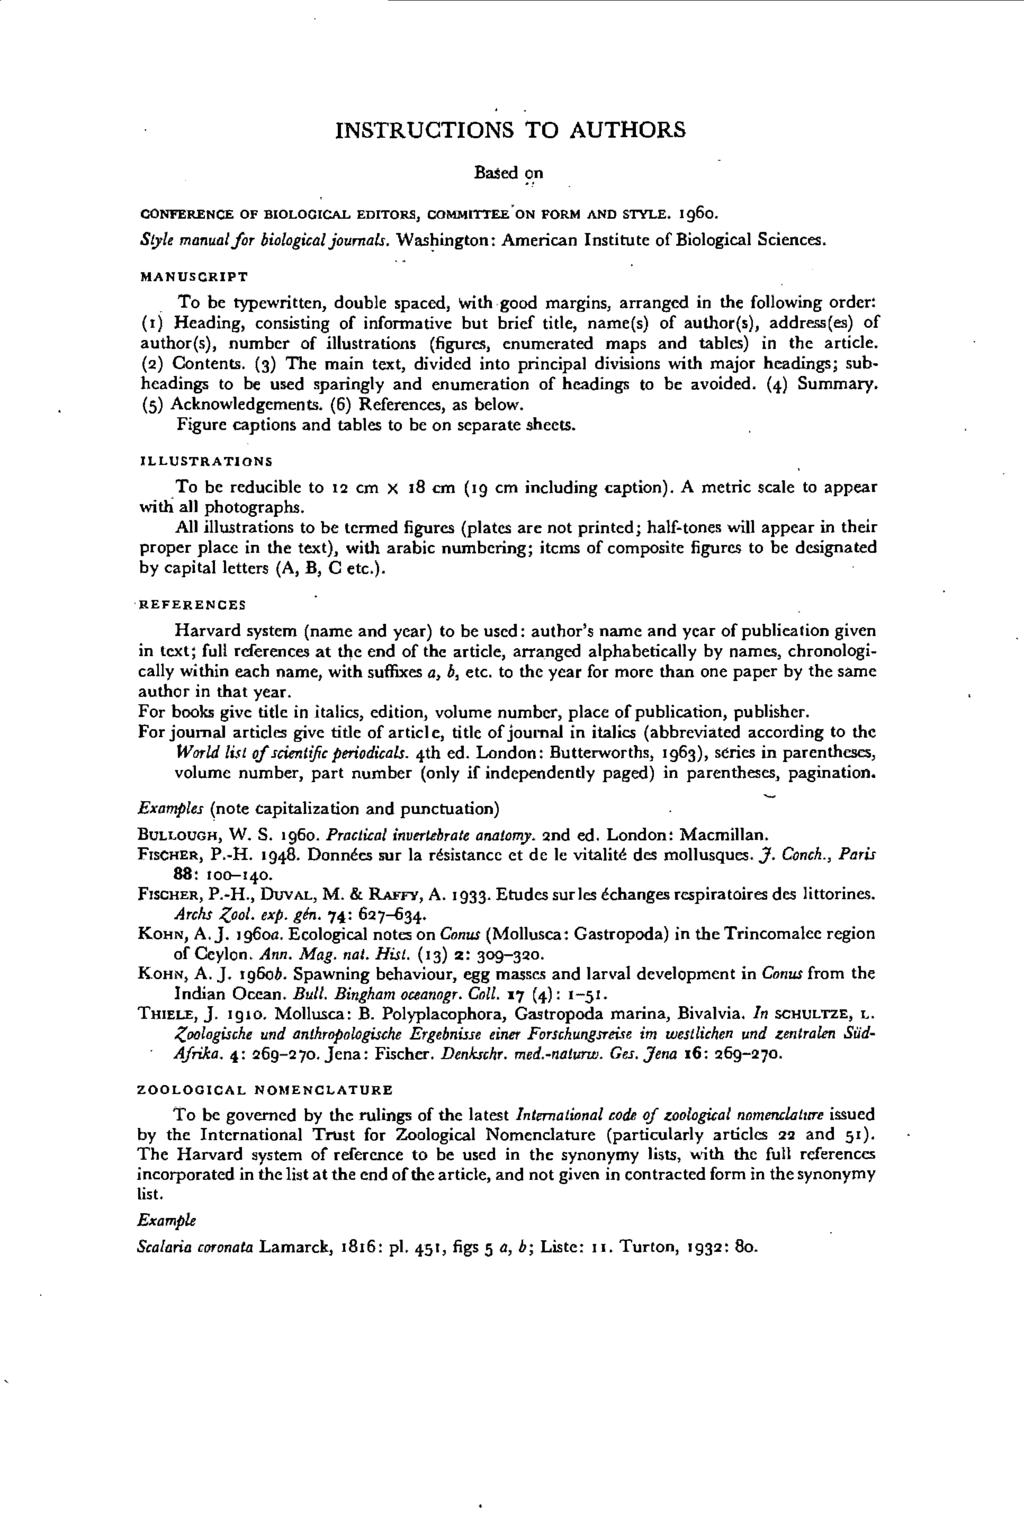 INSTRUCTIONS TO AUTHORS Based on CONFERENCE OF BIOLOGICAL EDITORS, COMMITTEE'ON FORM AND STYLE. 1960. Style manual for biological journals. Was~ington: American Institute of Biological Sciences.